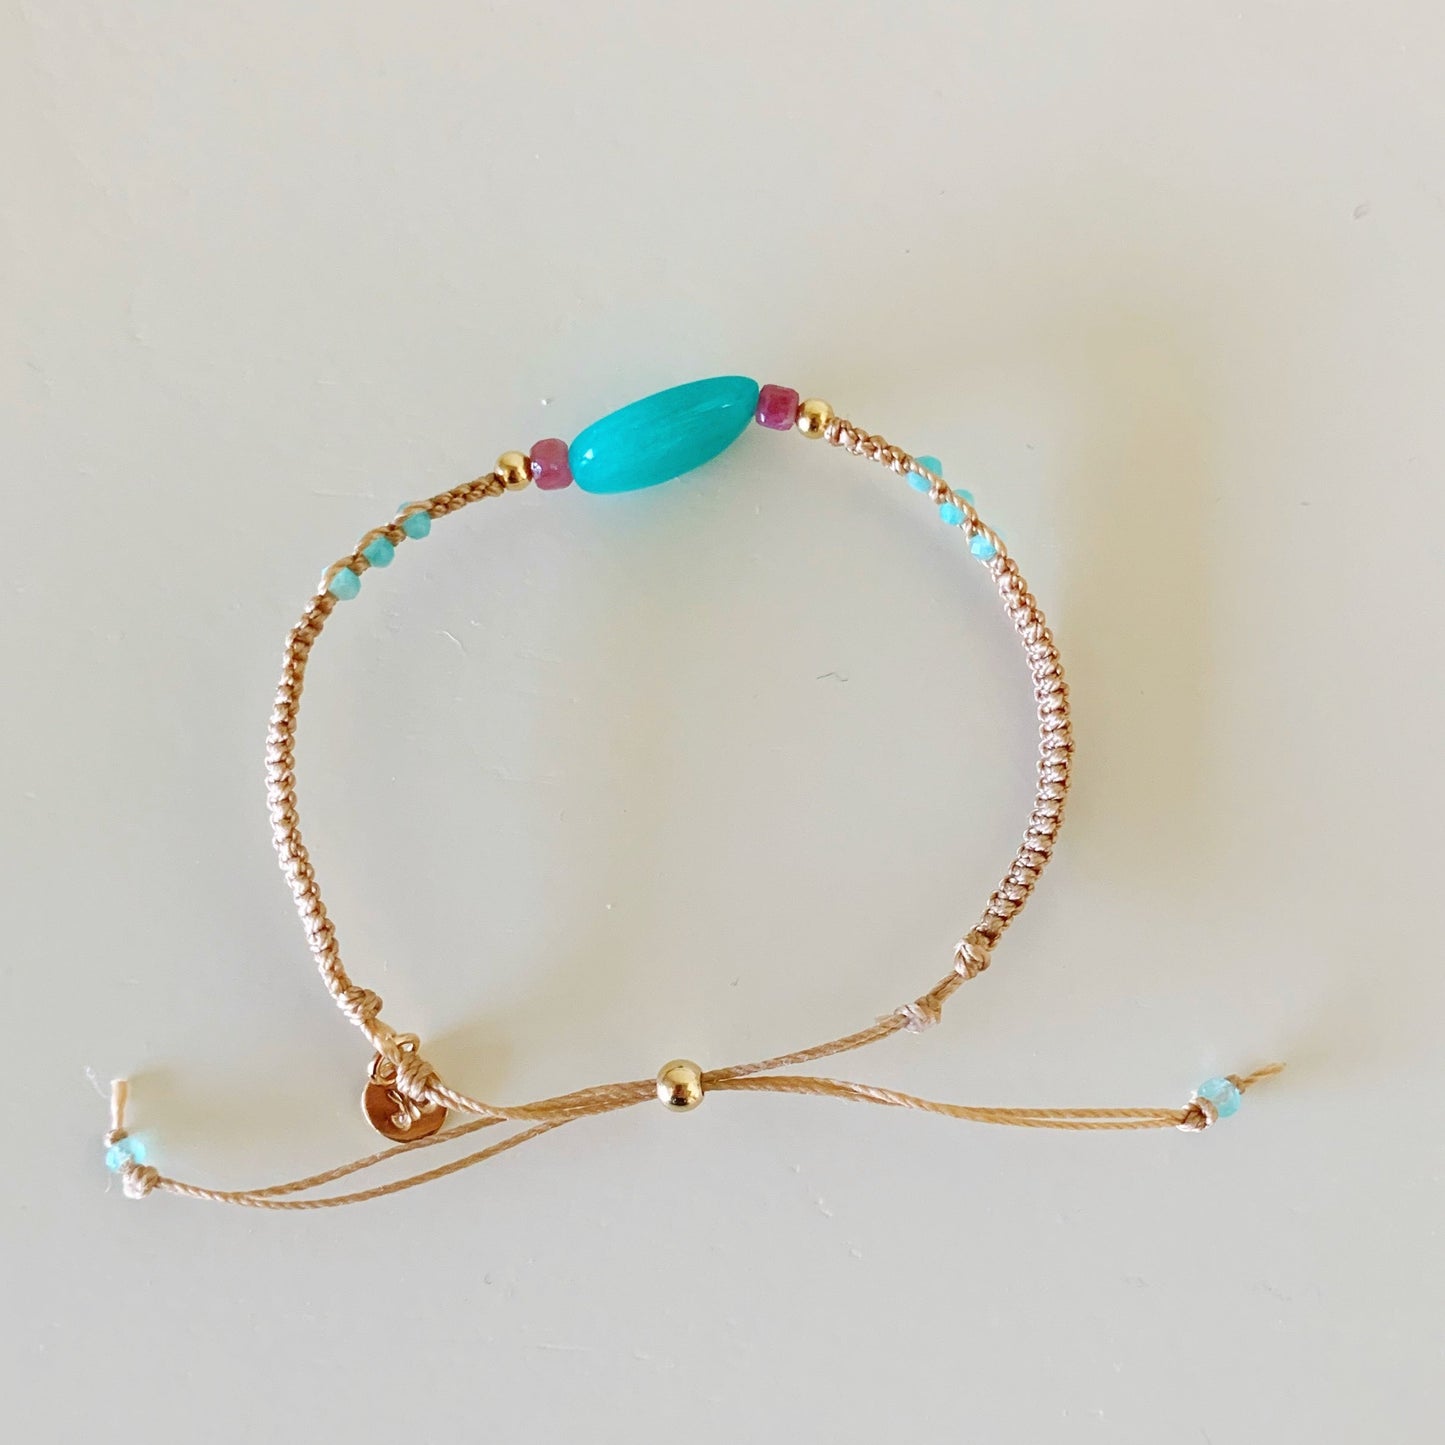 the harwich port adjustable macrame bracelet by mermaids and madeleines in color moonlit beach is a friendship style bracelet made with tan cord and a slide bead clasp. this bracelet has a large amazonite bead at center with pink tourmaline and 14k gold filled beads on either side. this image is a full view and profile picture of the bracelet photographed on a white surface